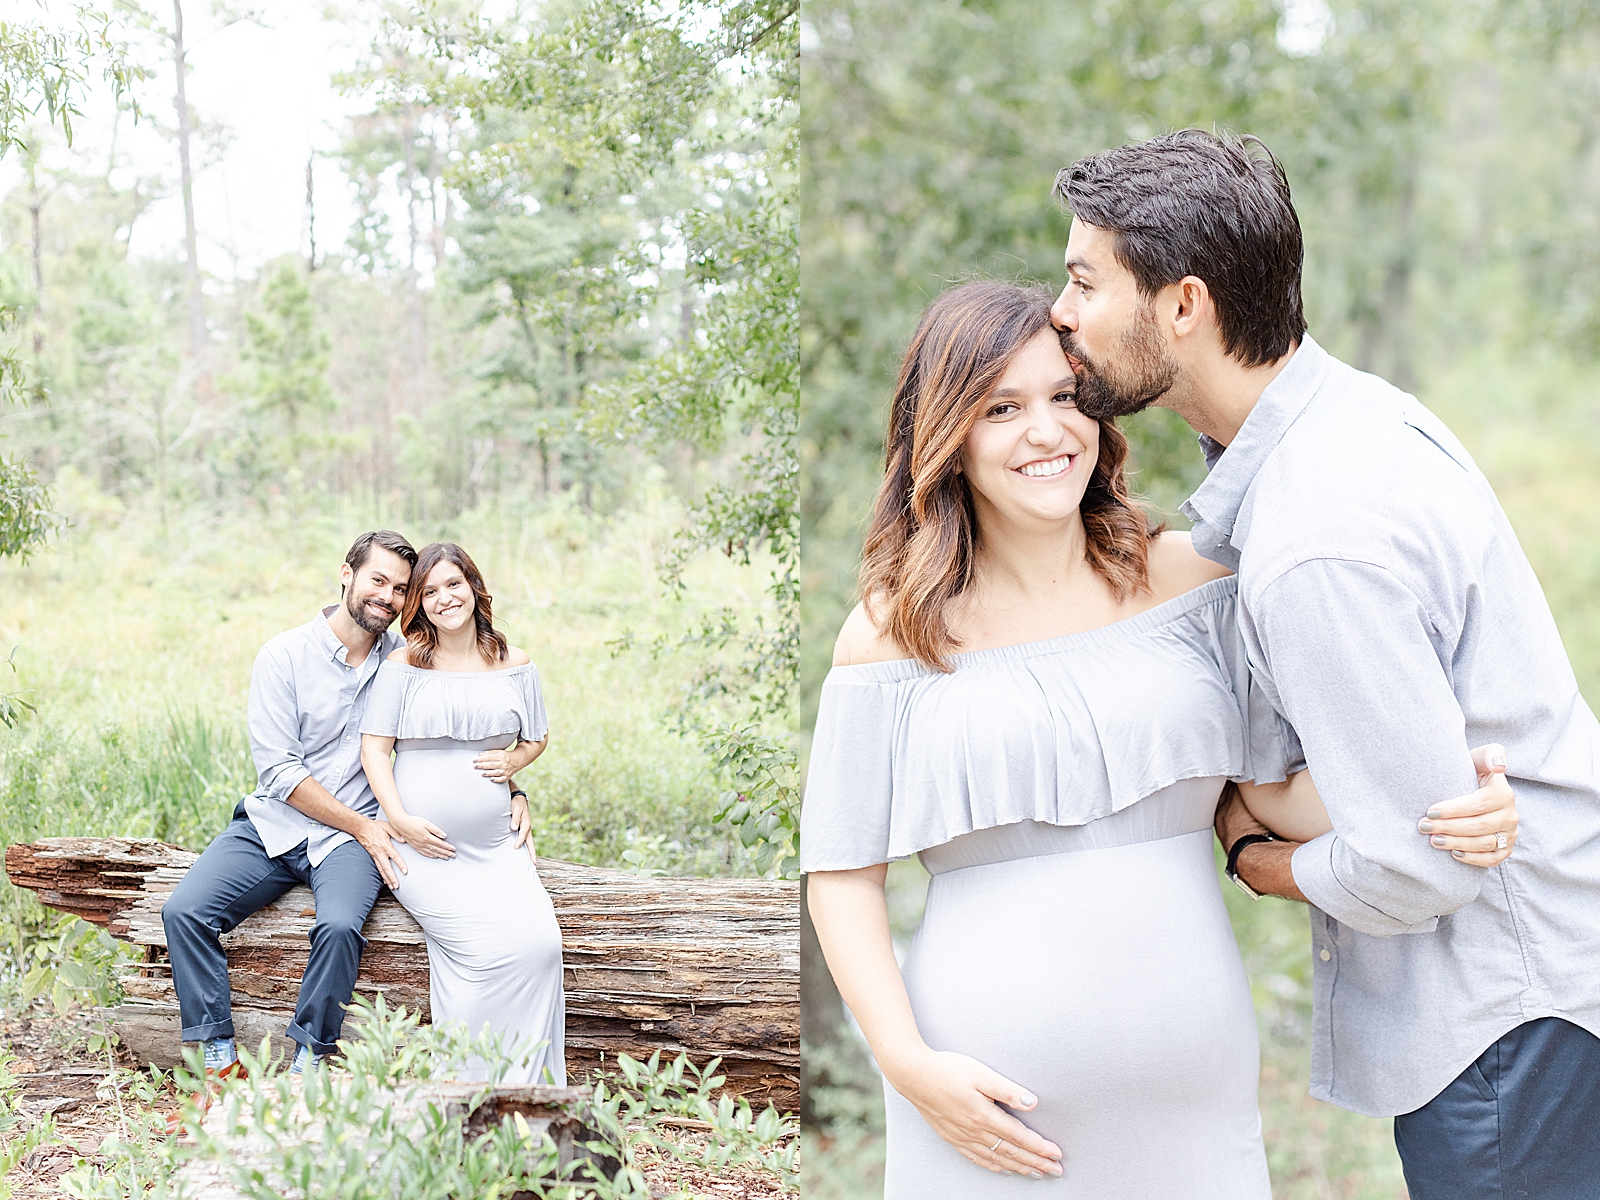 Rainbow baby maternity session with expecting husband and wife sitting on a fallen log with their heads together holding on to baby bump and husband kissing wife on forehead as she holds on to her baby bump